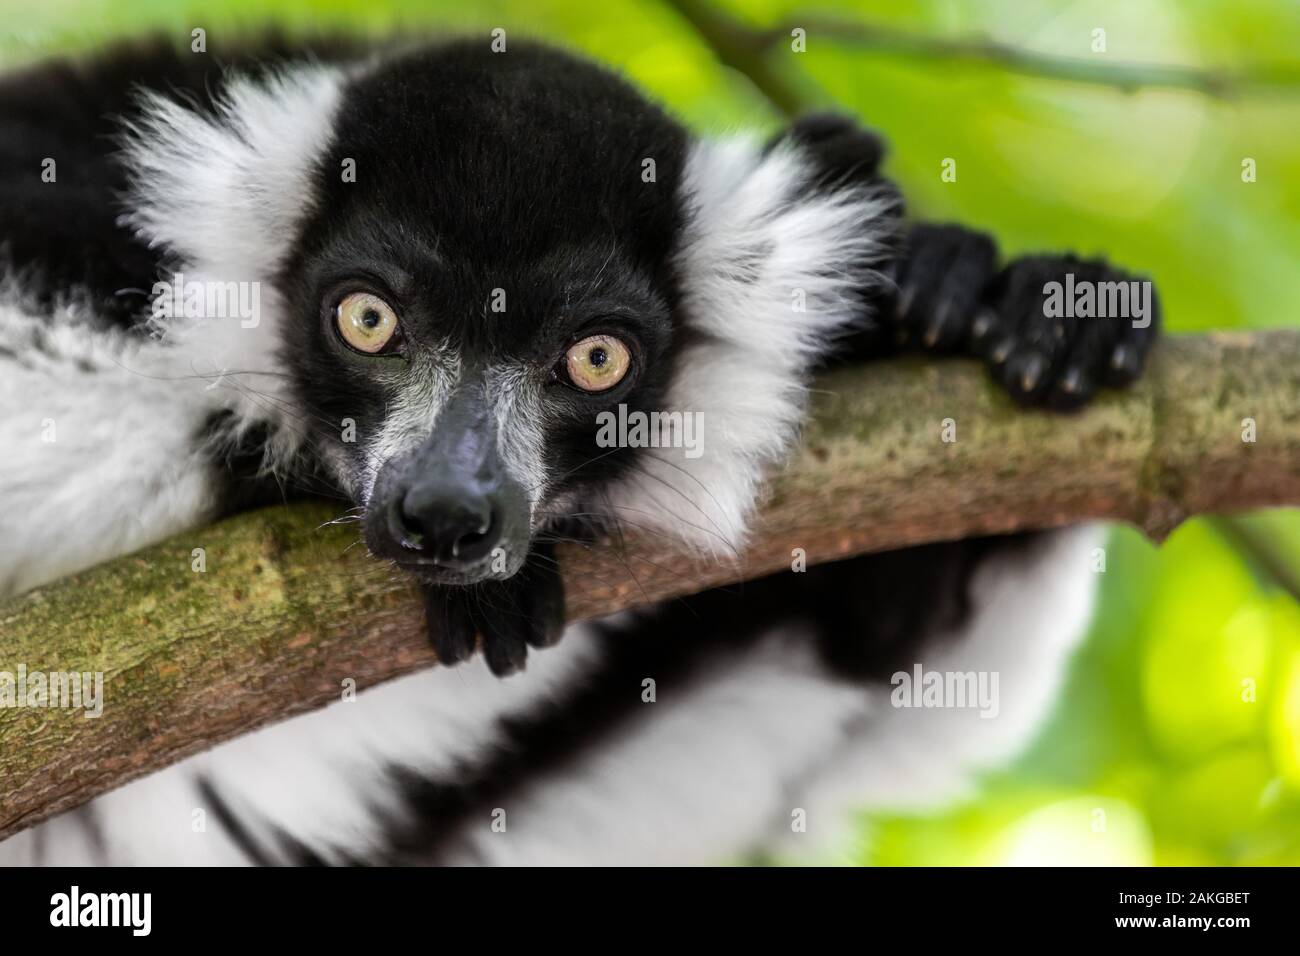 Close up of a black and white ruffed lemur perched on a branch and staring at the camera, against a green bokeh background Stock Photo